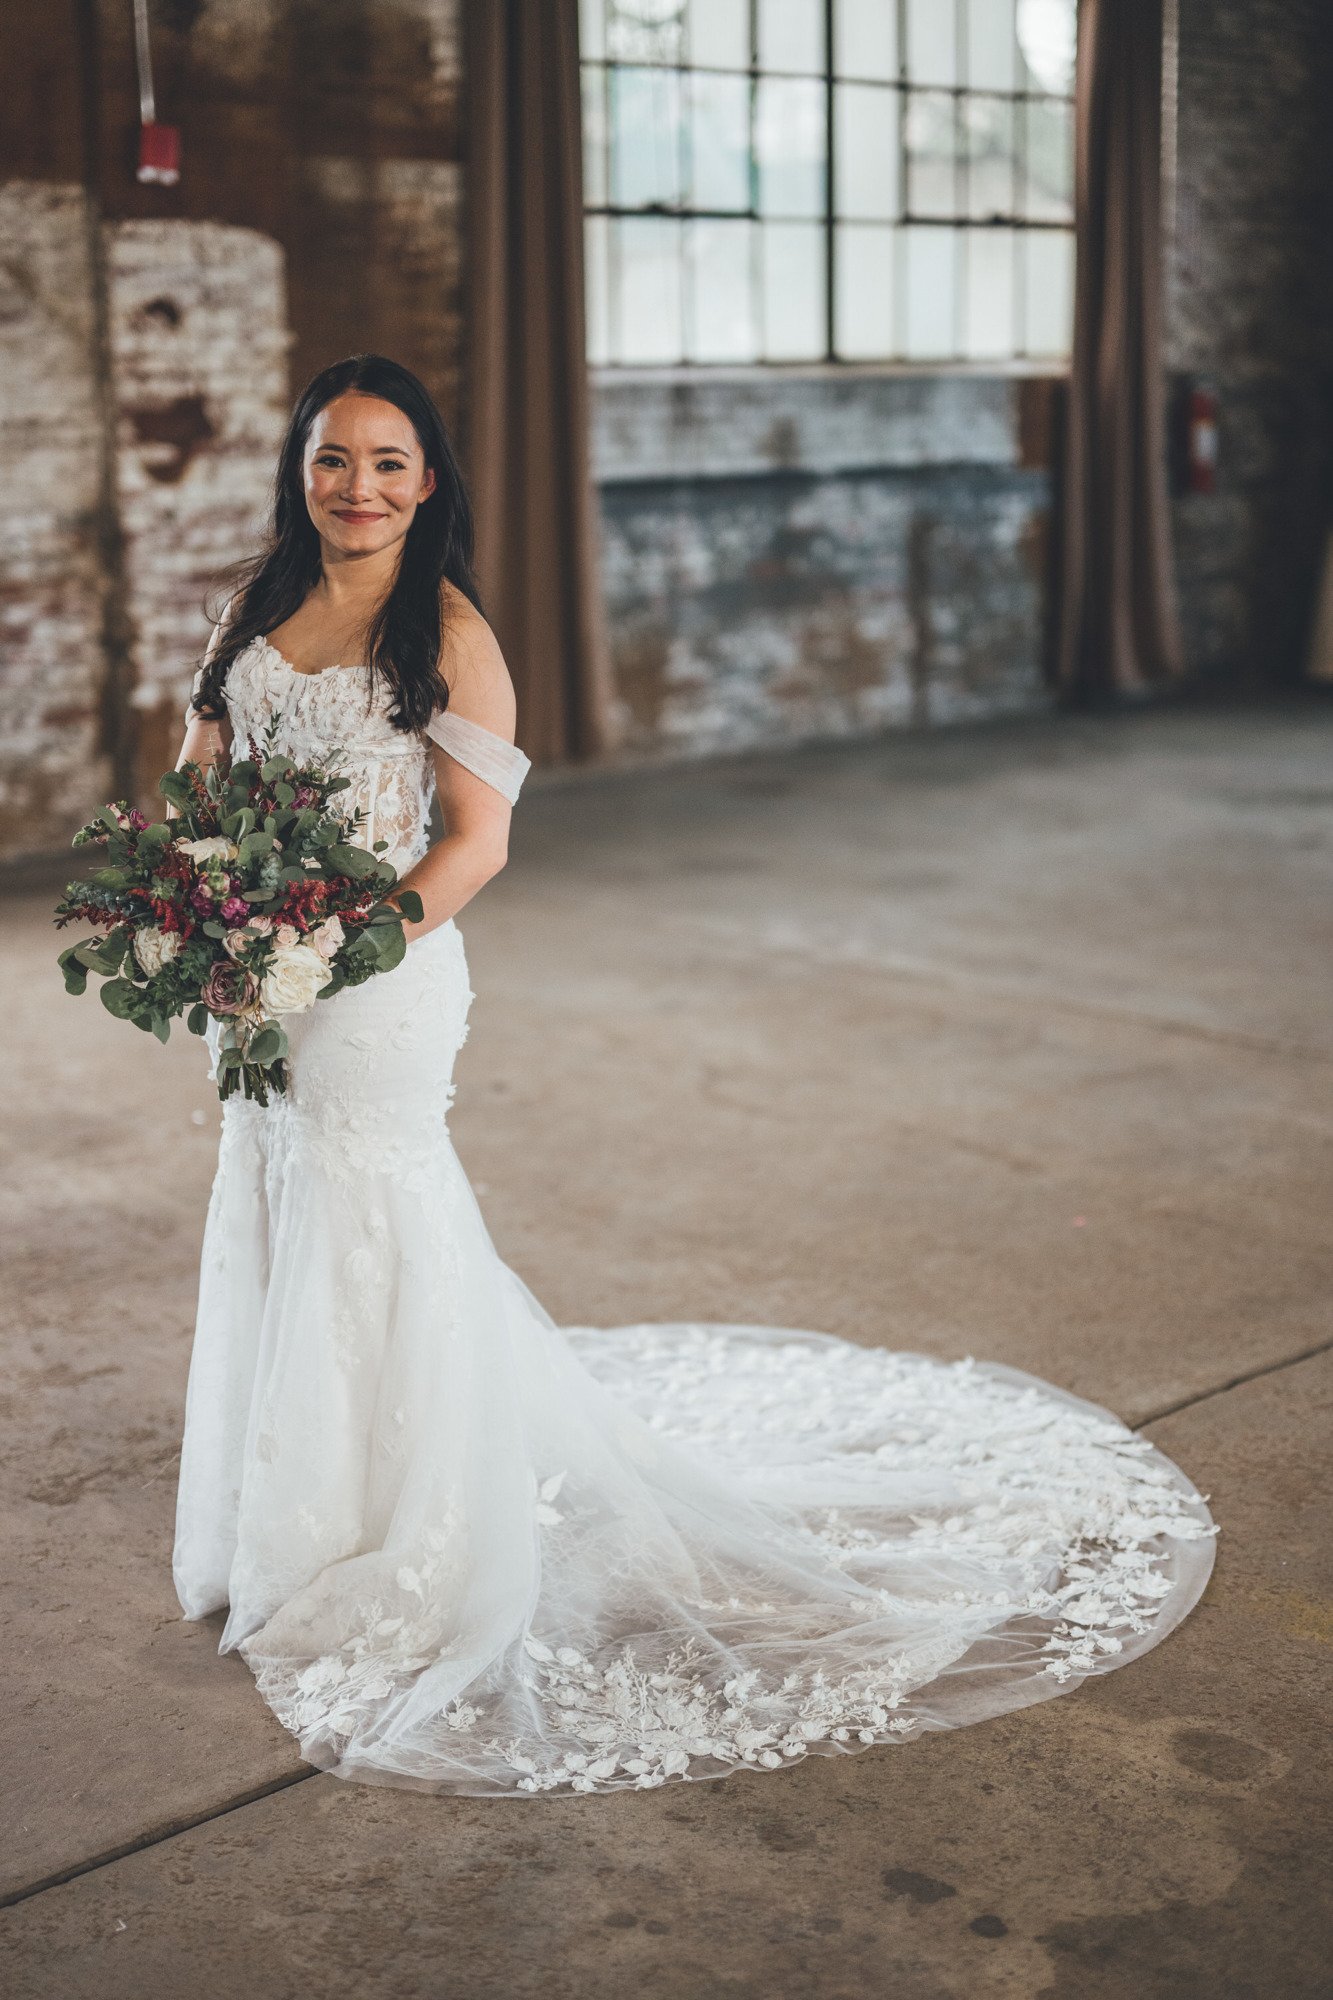 Bow Tie Photo & Video bride poses at The Glass Factory in Jacksonville, Florida ahead of wedding ceremony.jpg